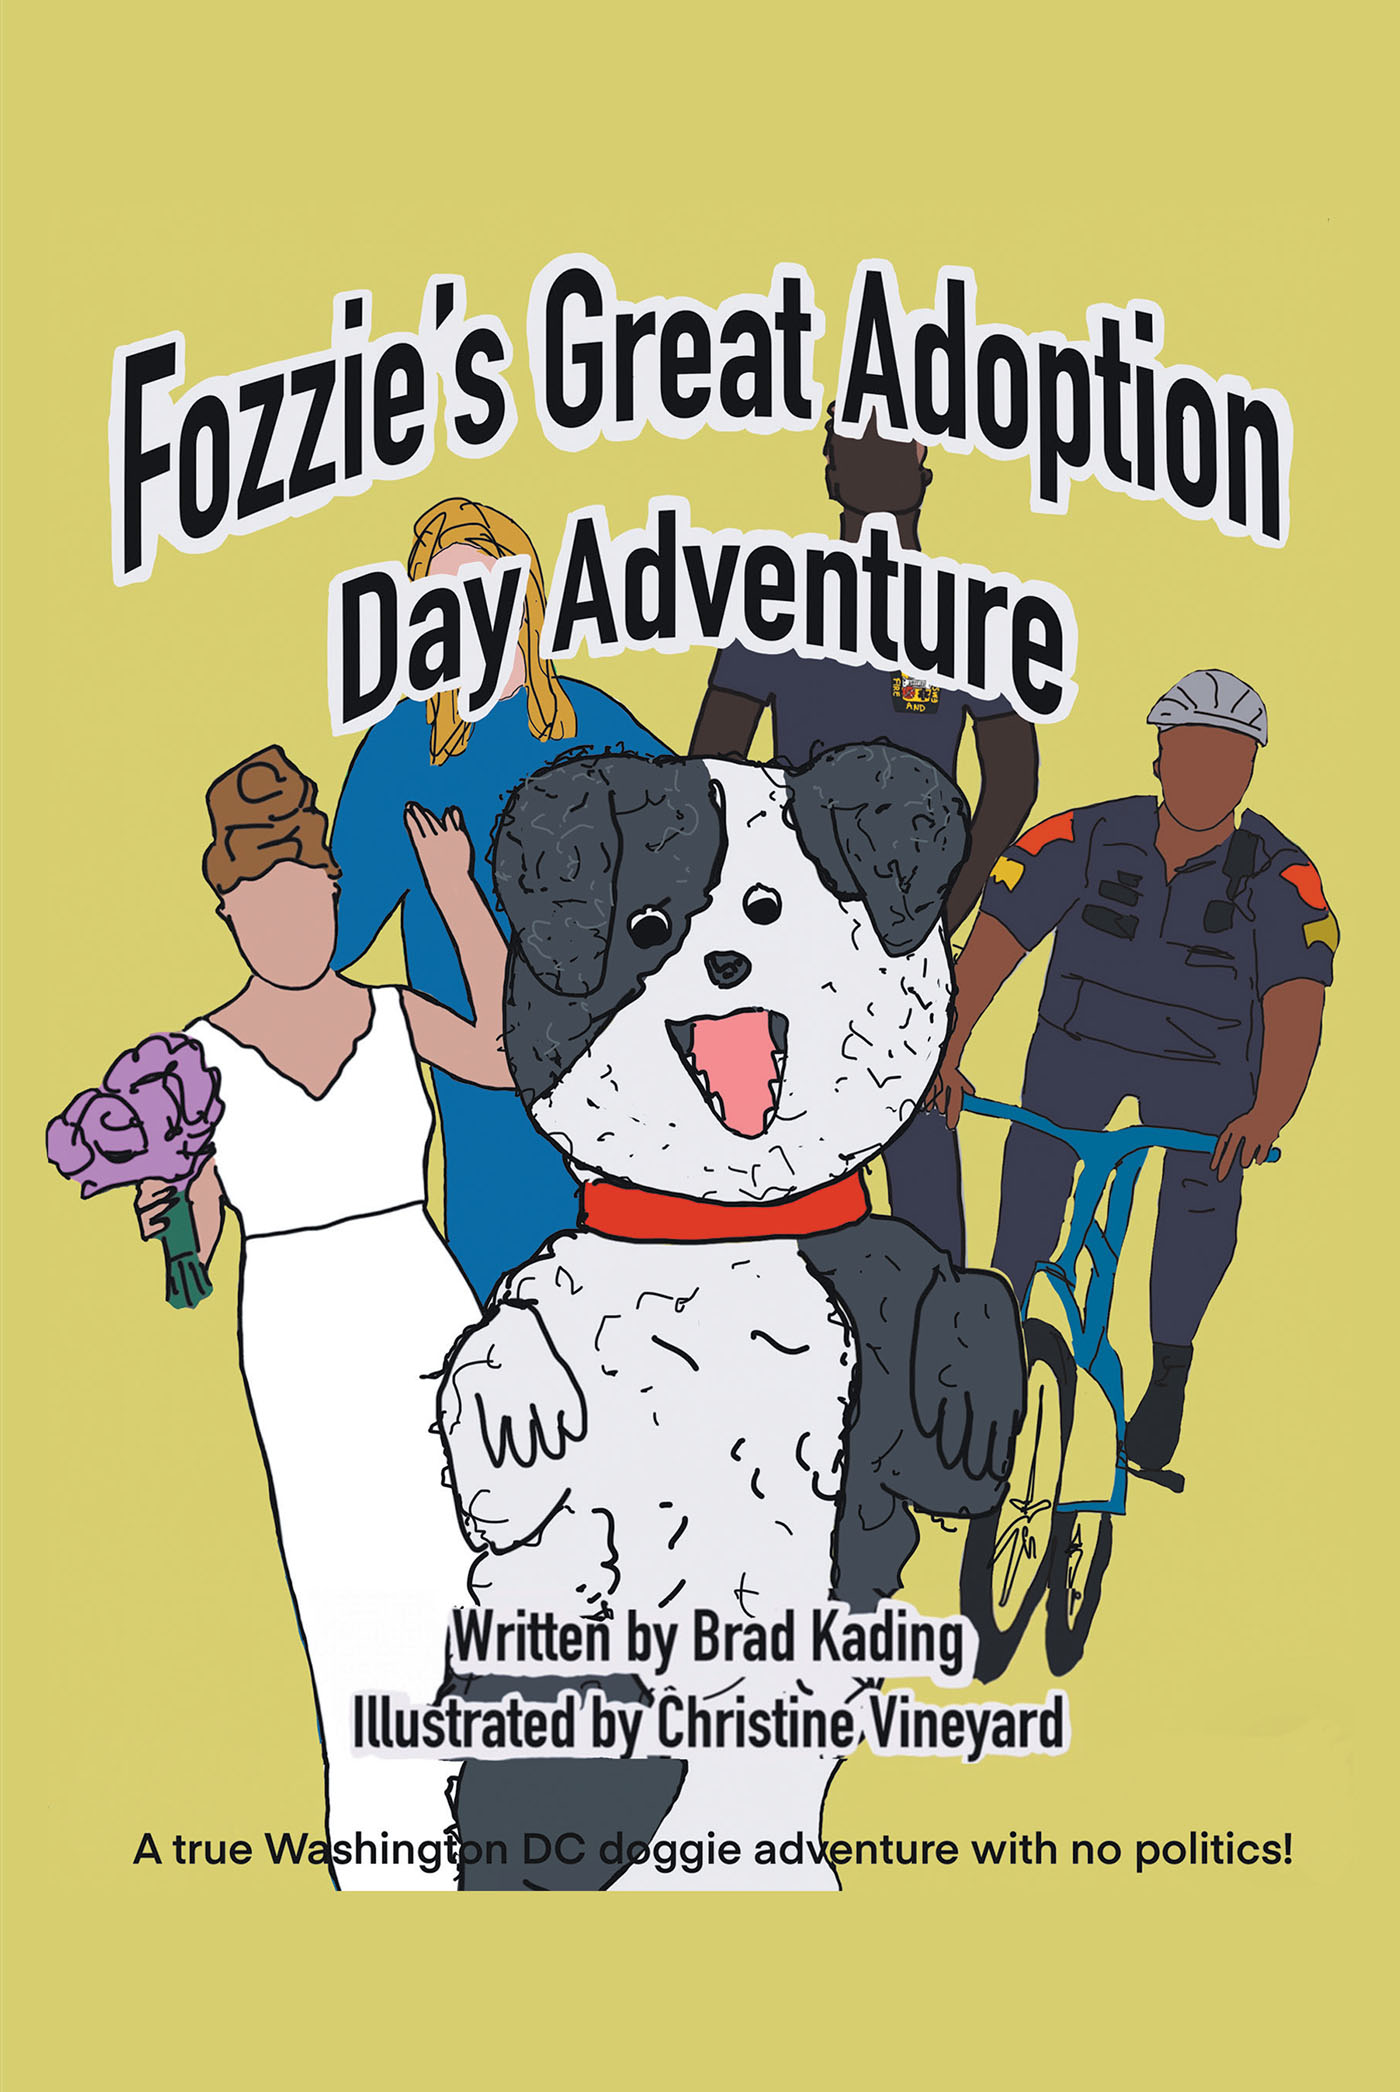 Bradley Kading’s New Book, “Fozzie’s Great Adoption Day Adventure,” is a Perfect Children’s Adventure Story with a Happy Ending for Readers of All Ages